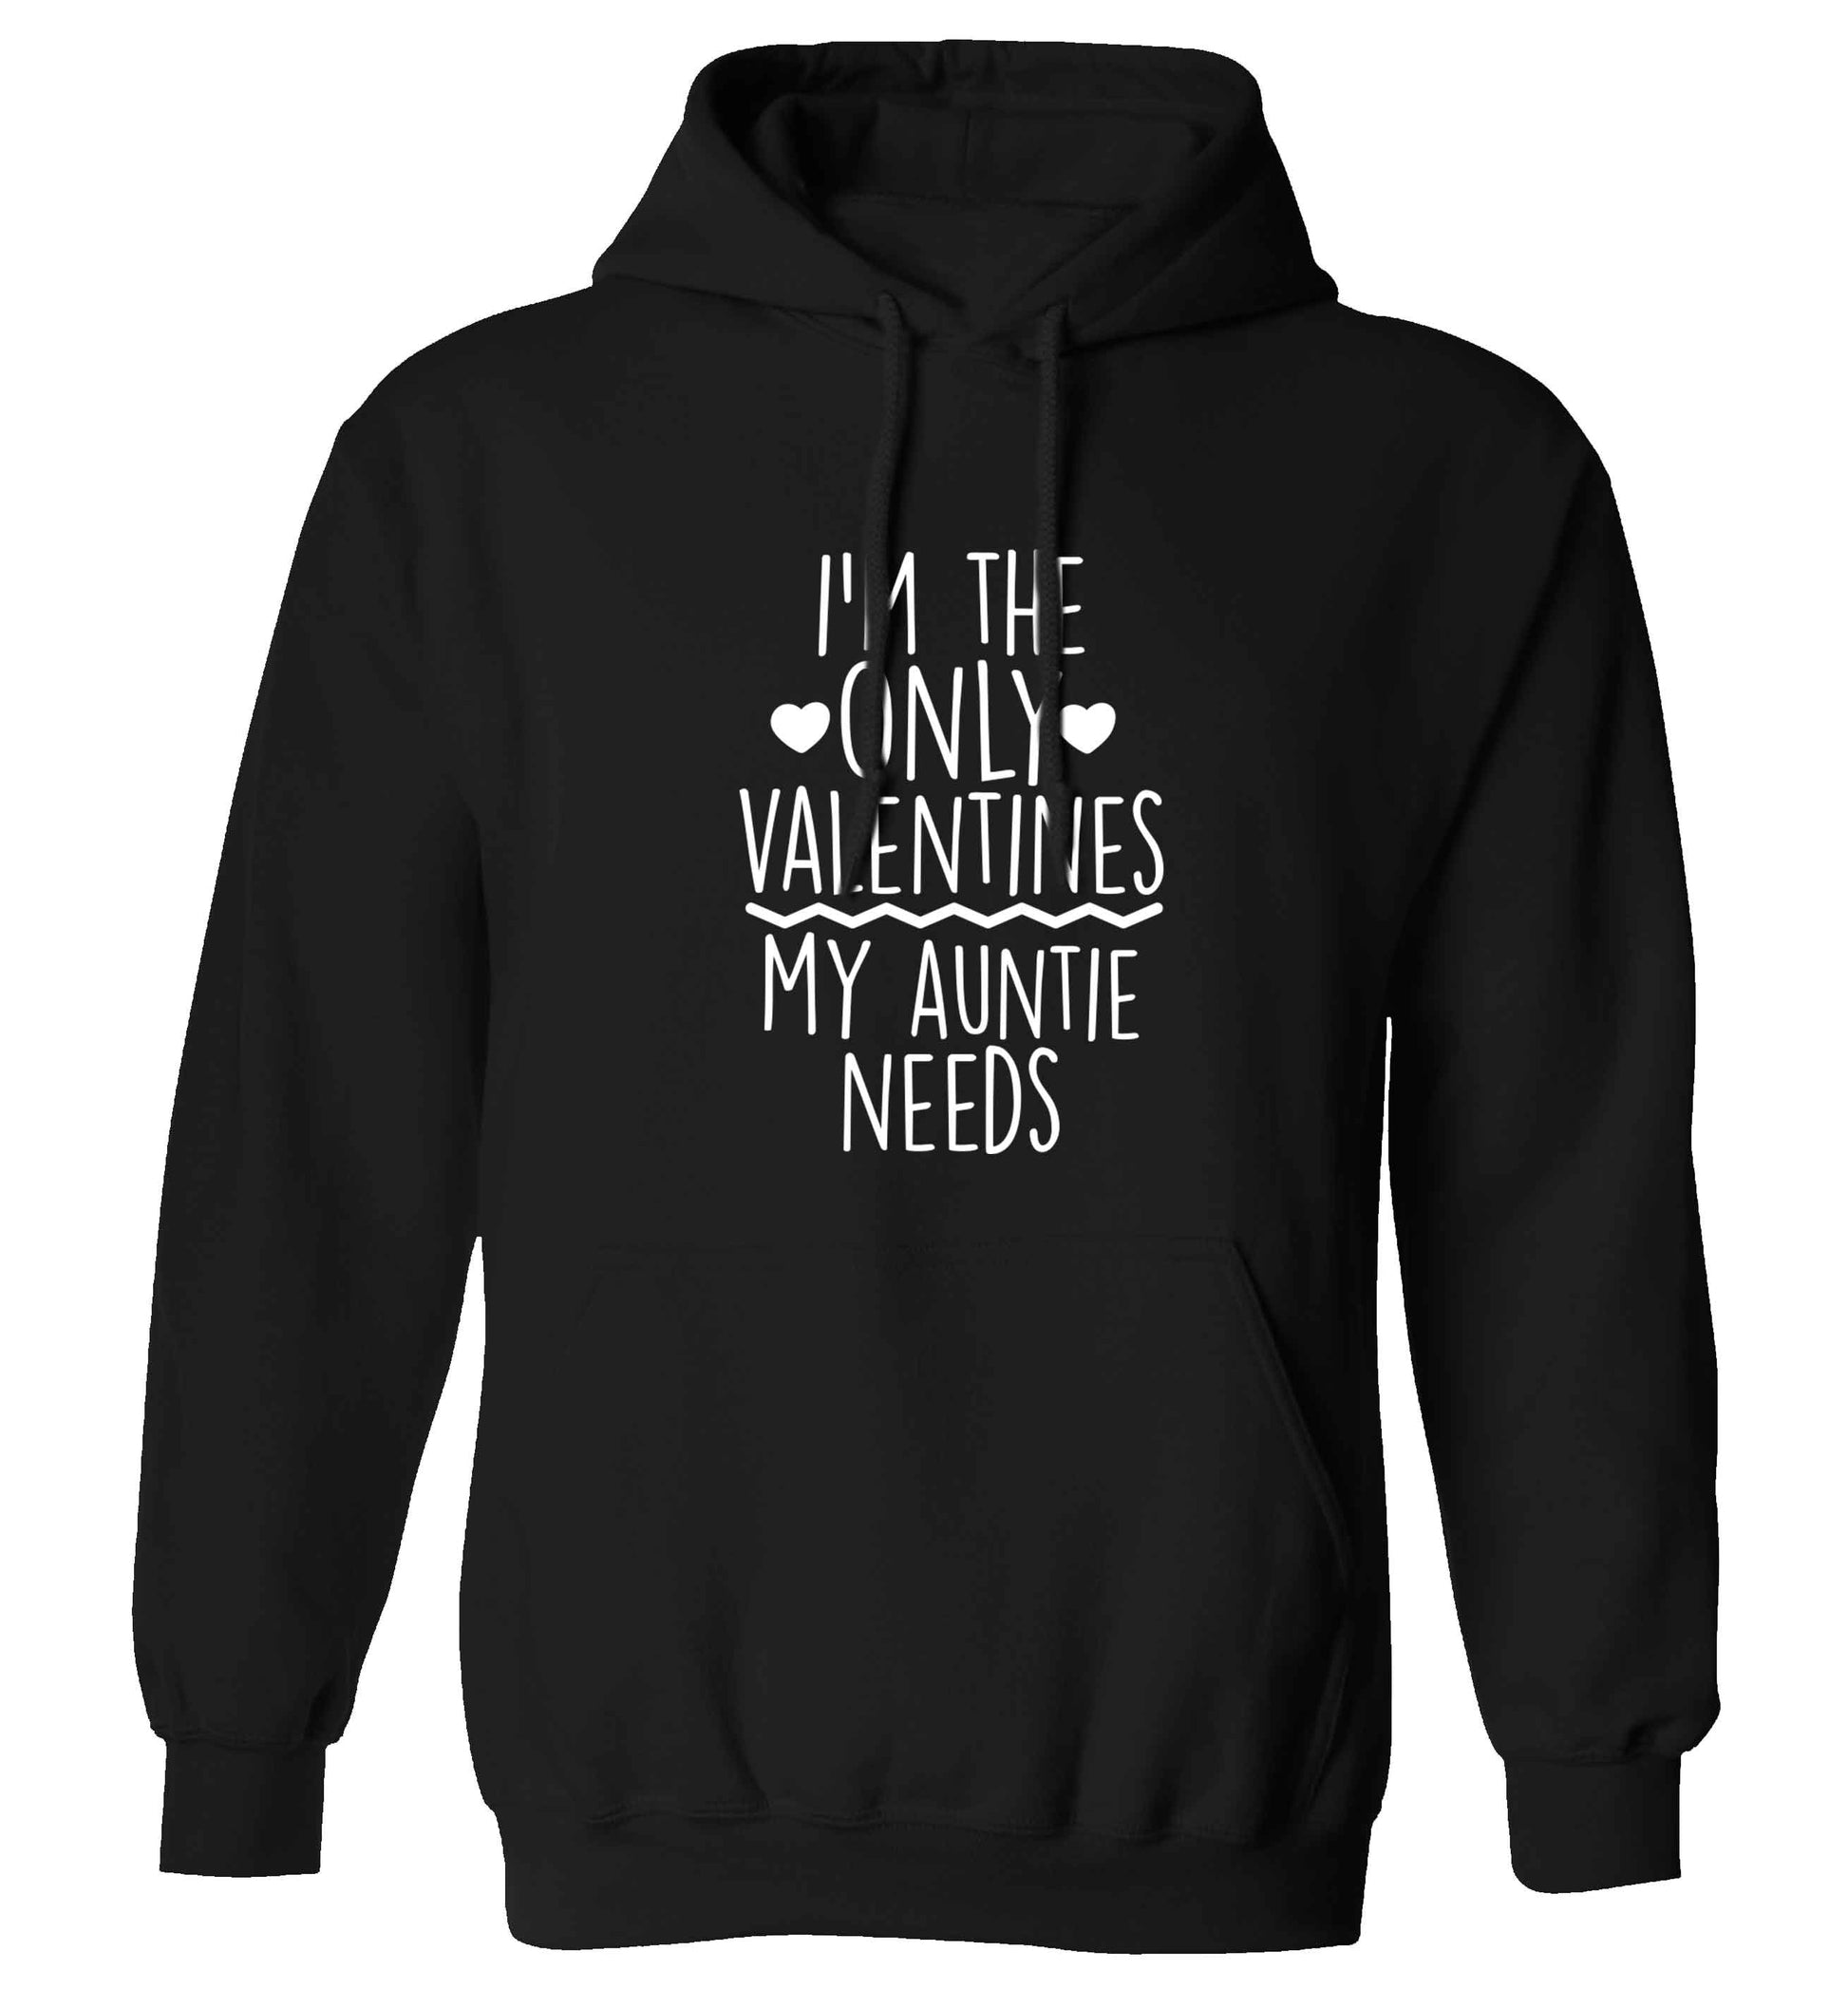 I'm the only valentines my auntie needs adults unisex black hoodie 2XL